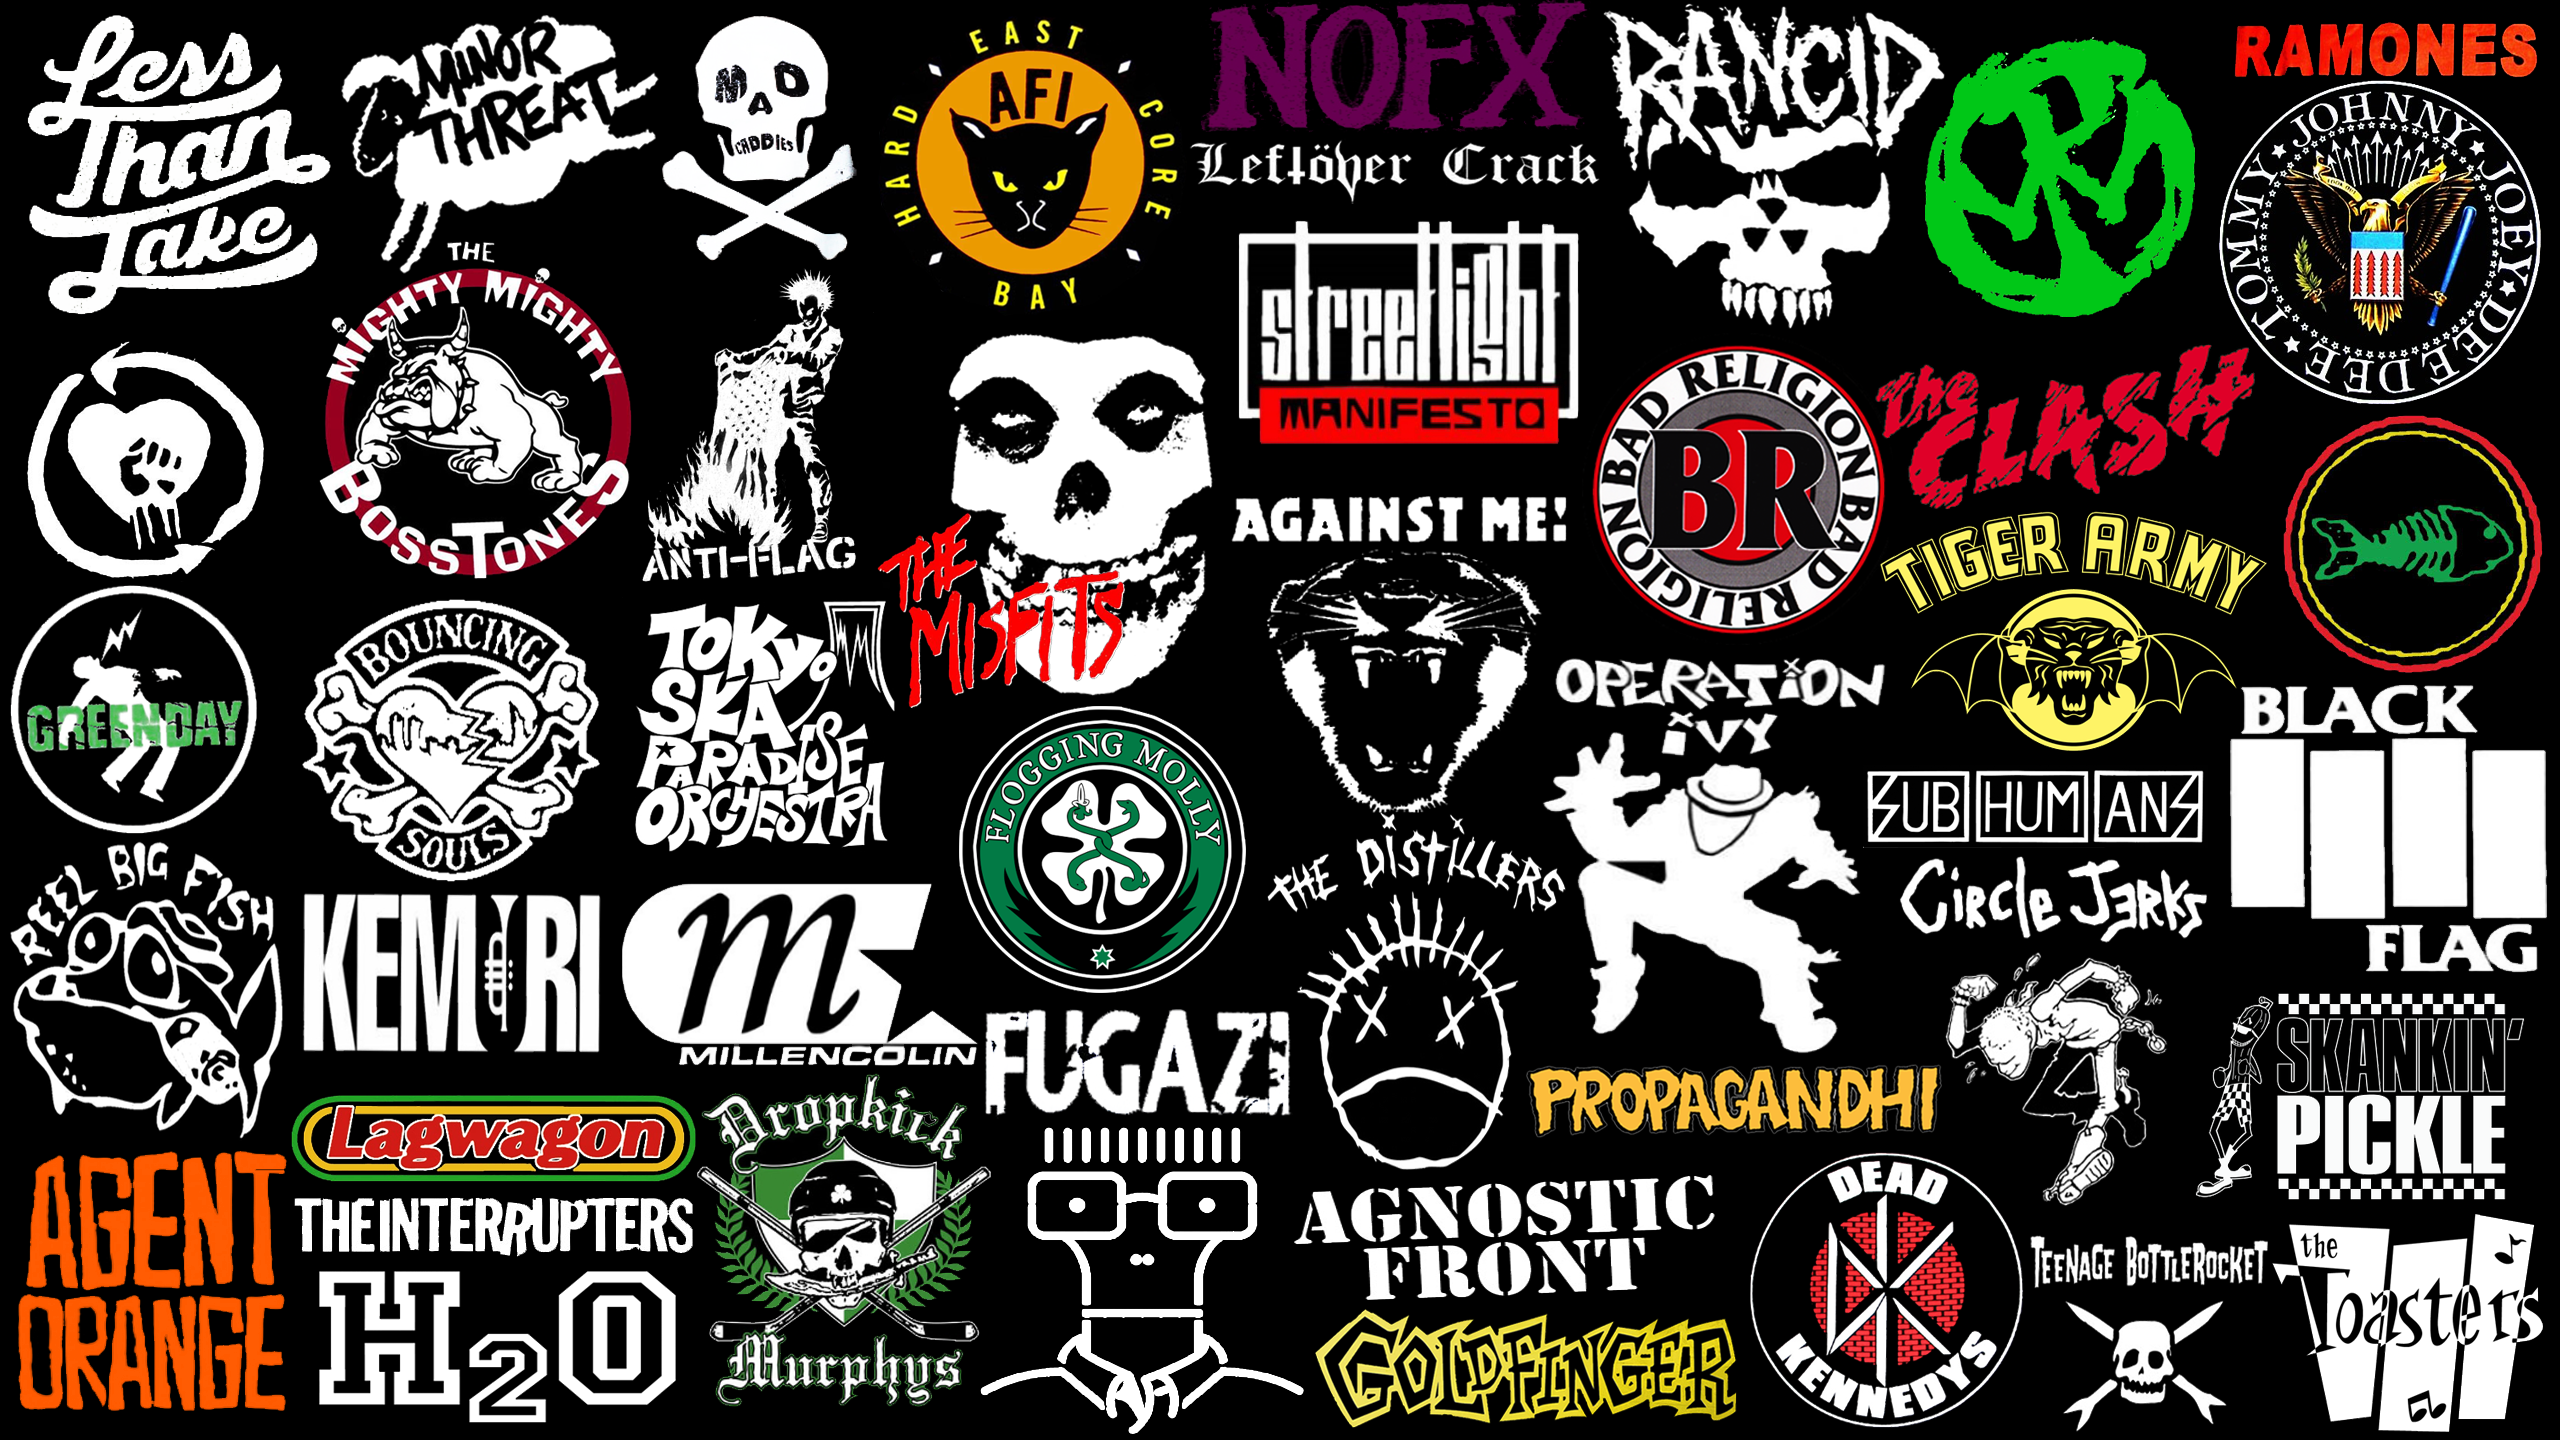 General 2560x1440 punk rock music Bad Religion Dead Kennedys band logo Descendents Minor Threat Ramones The Clash Streetlight Manifesto Green Day Rise Against Misfits black background alternative subculture agnostic front NOFX